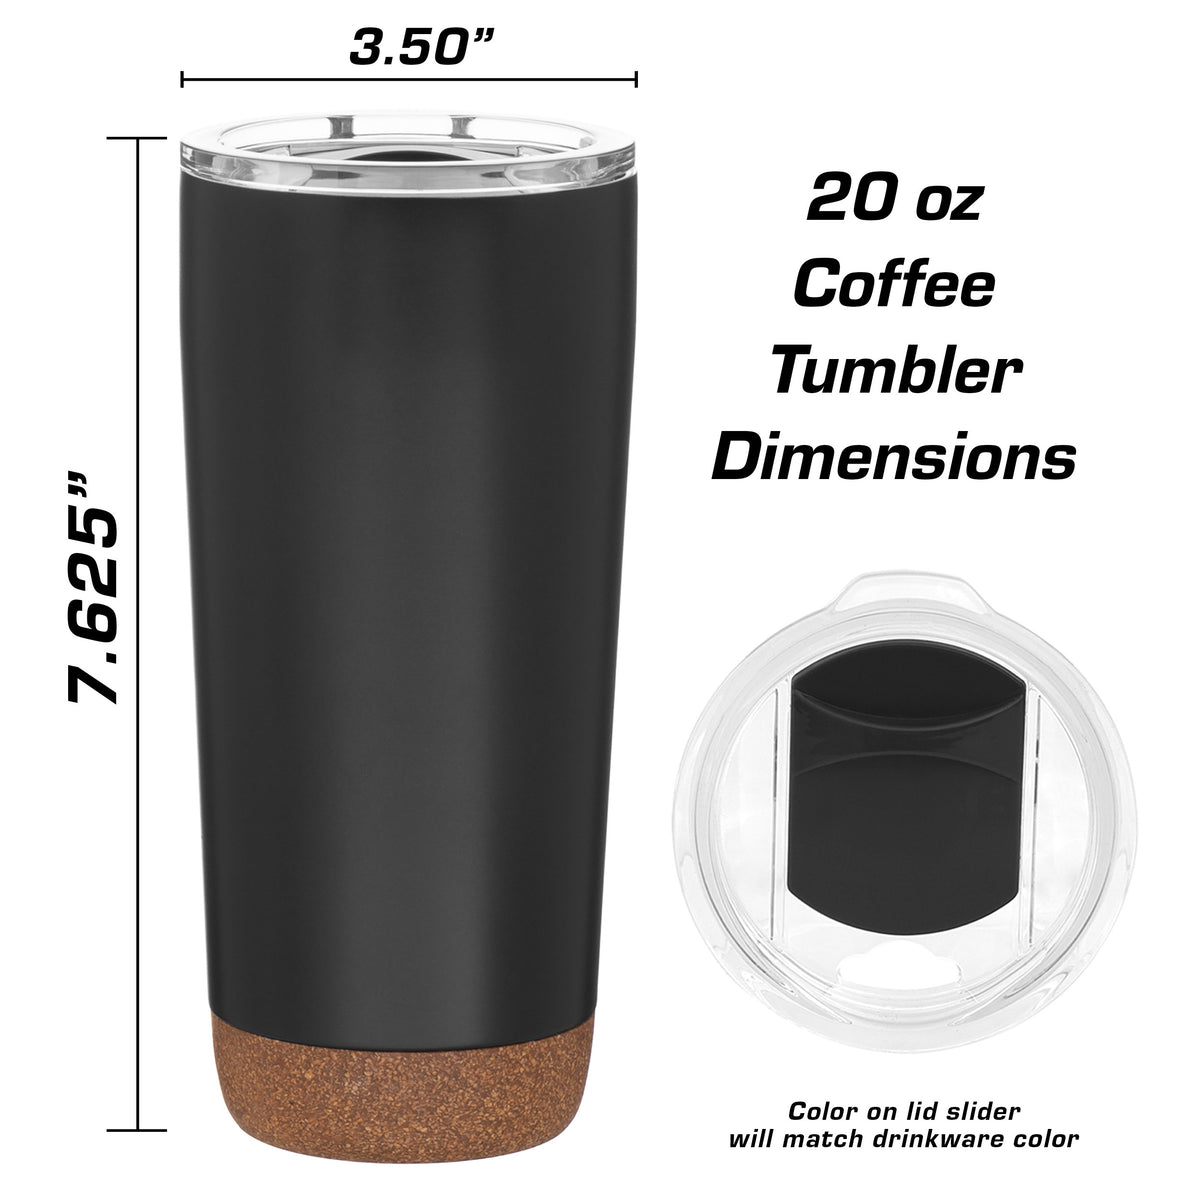 SS MAMA Insulated Stainless Steel Coffee Tumbler - 20 oz